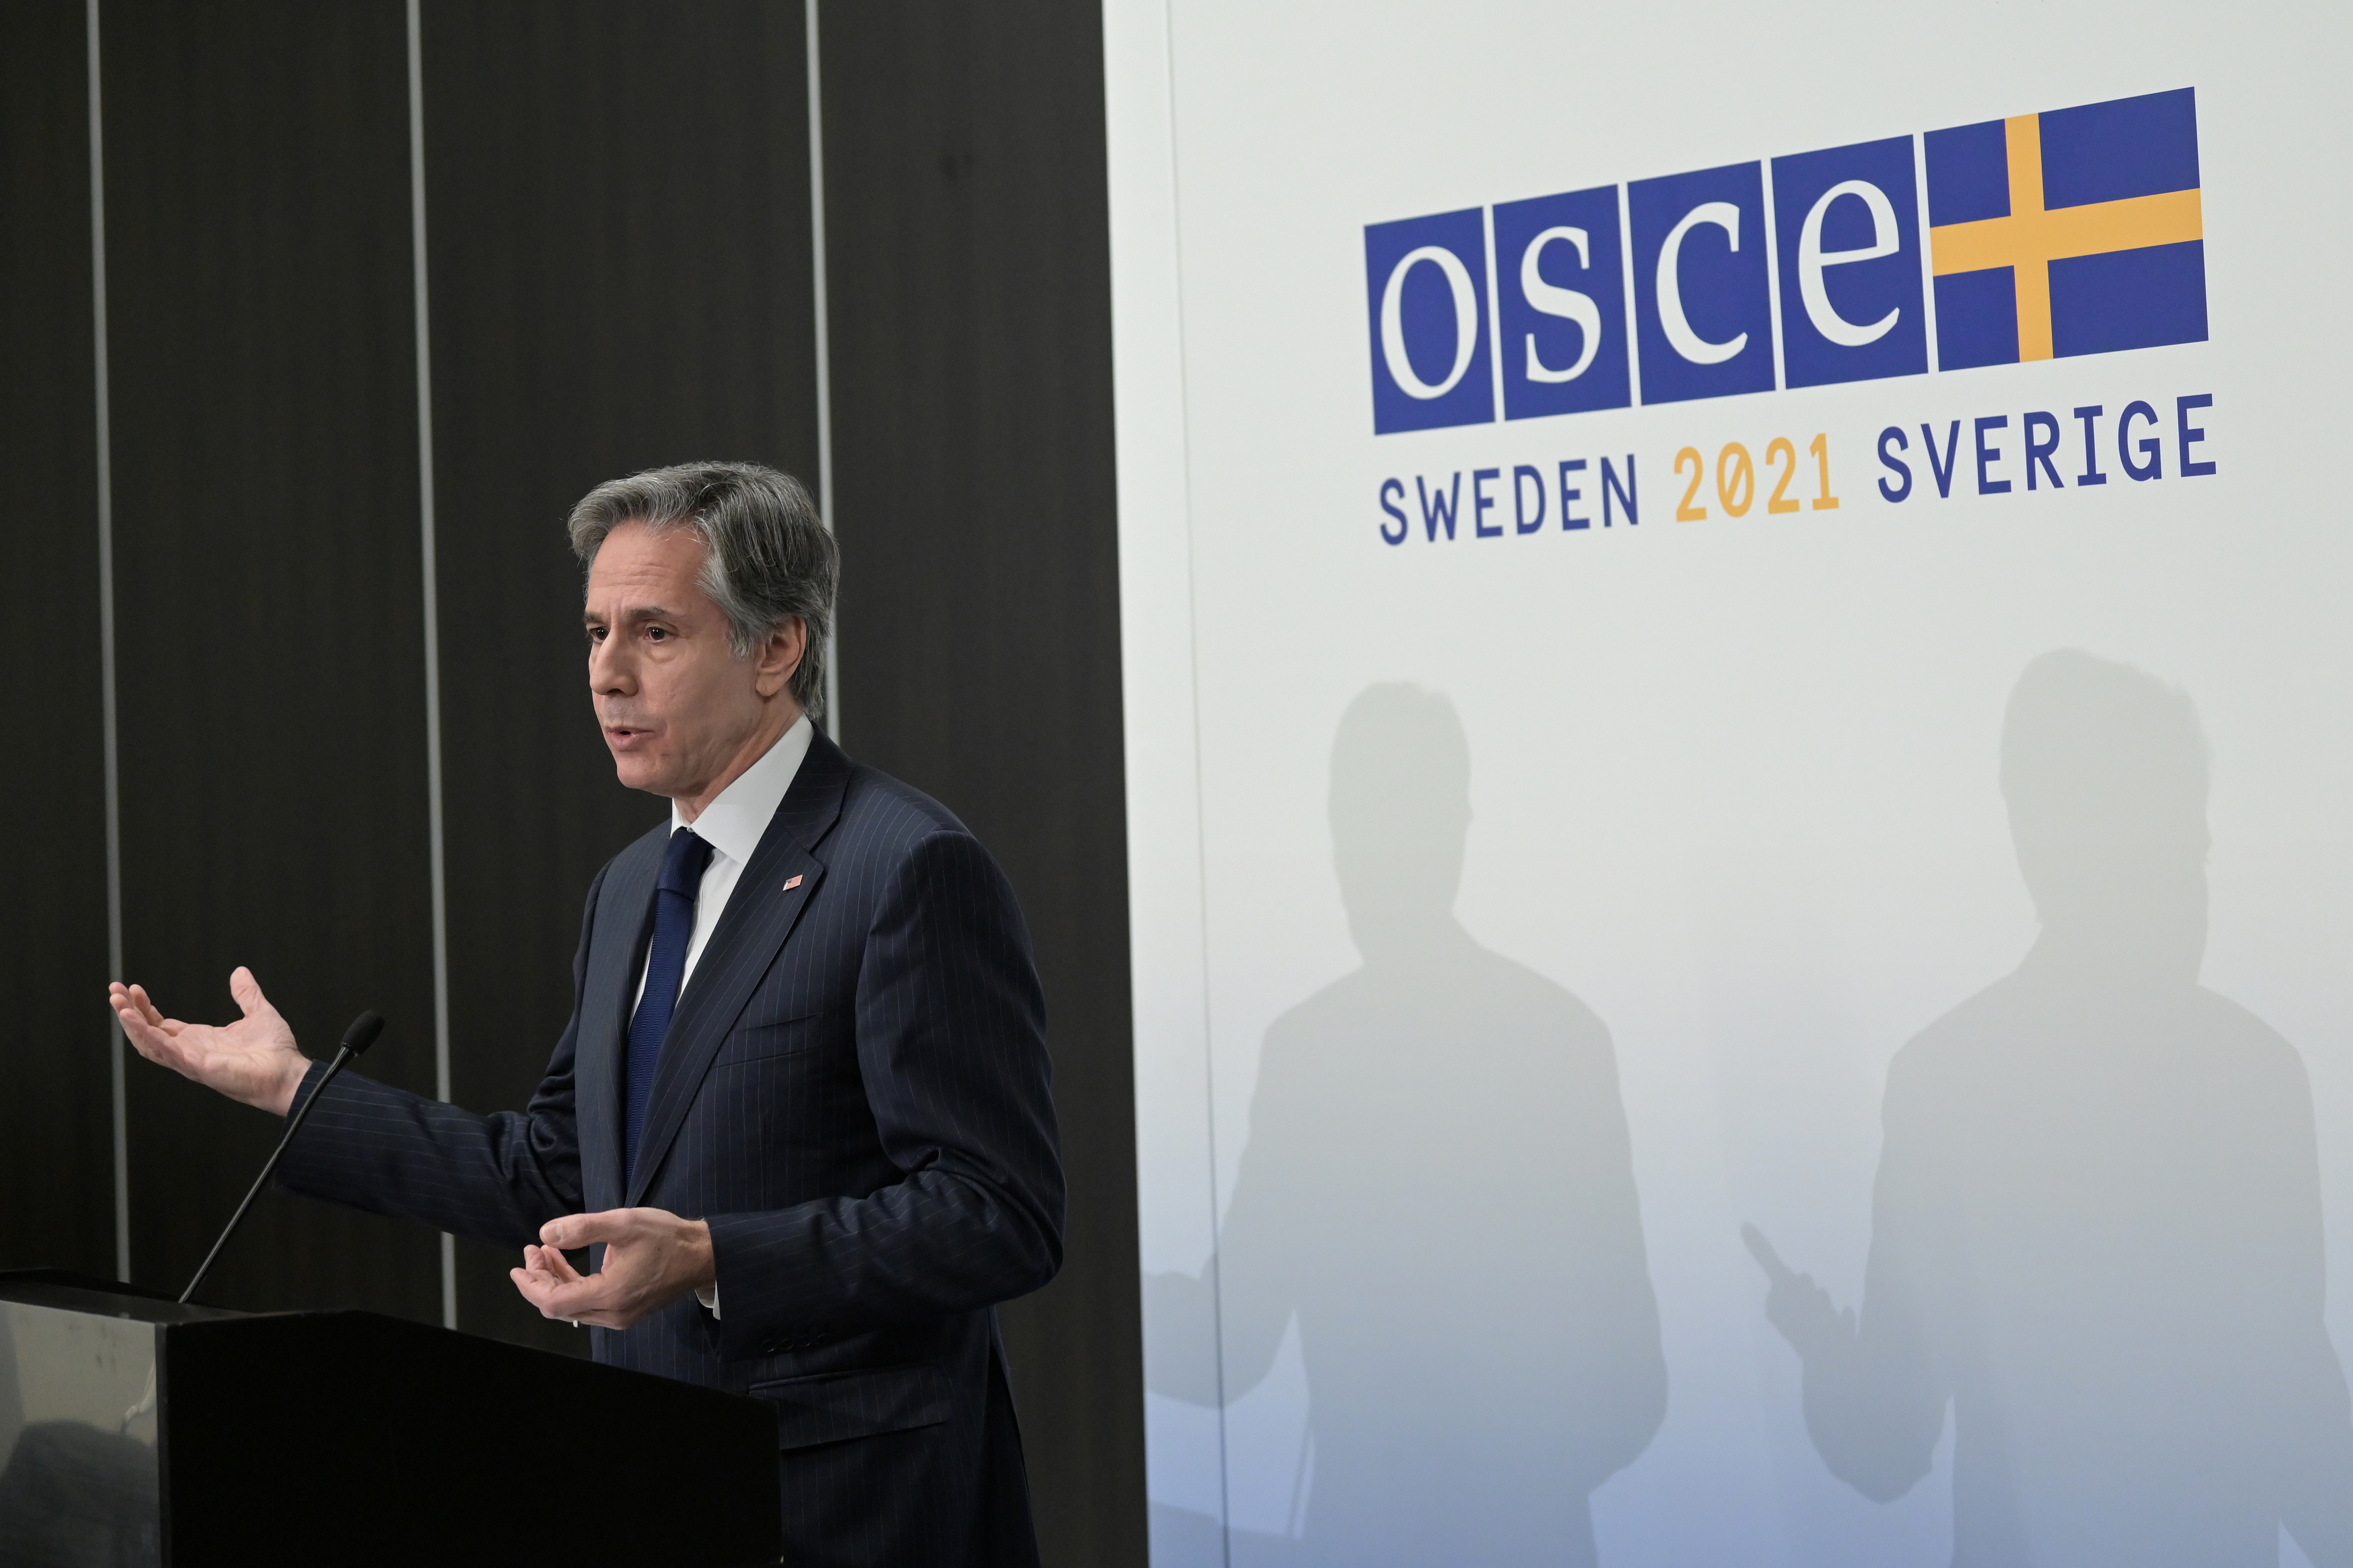 U.S. Secretary of State Antony Blinken addresses a press conference during a ministerial council meeting of the Organisation for Security and Cooperation in Europe (OSCE) in Stockholm, Sweden, December 2, 2021. Jonathan Nackstrand/Pool via REUTERS